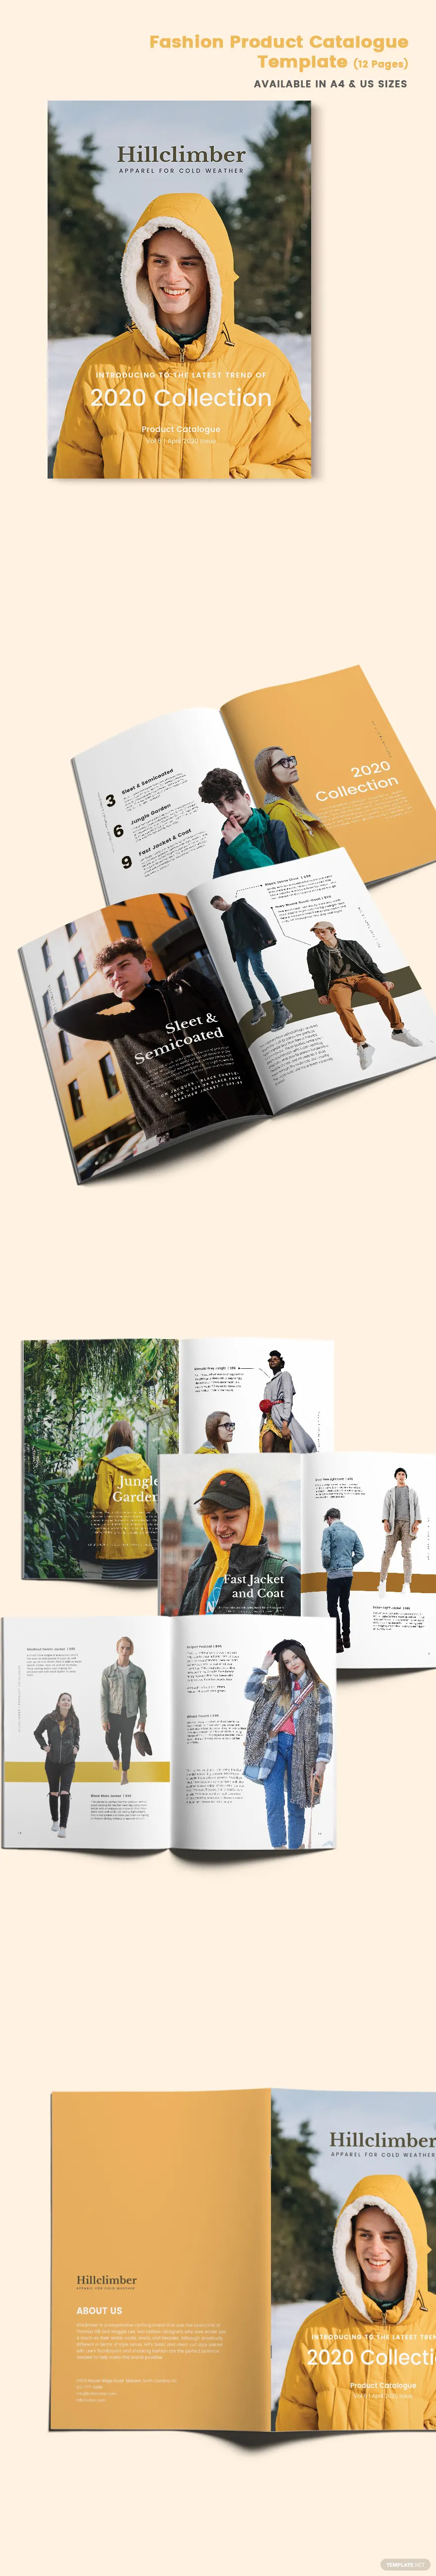 fashion-catalog-ideas-and-examples